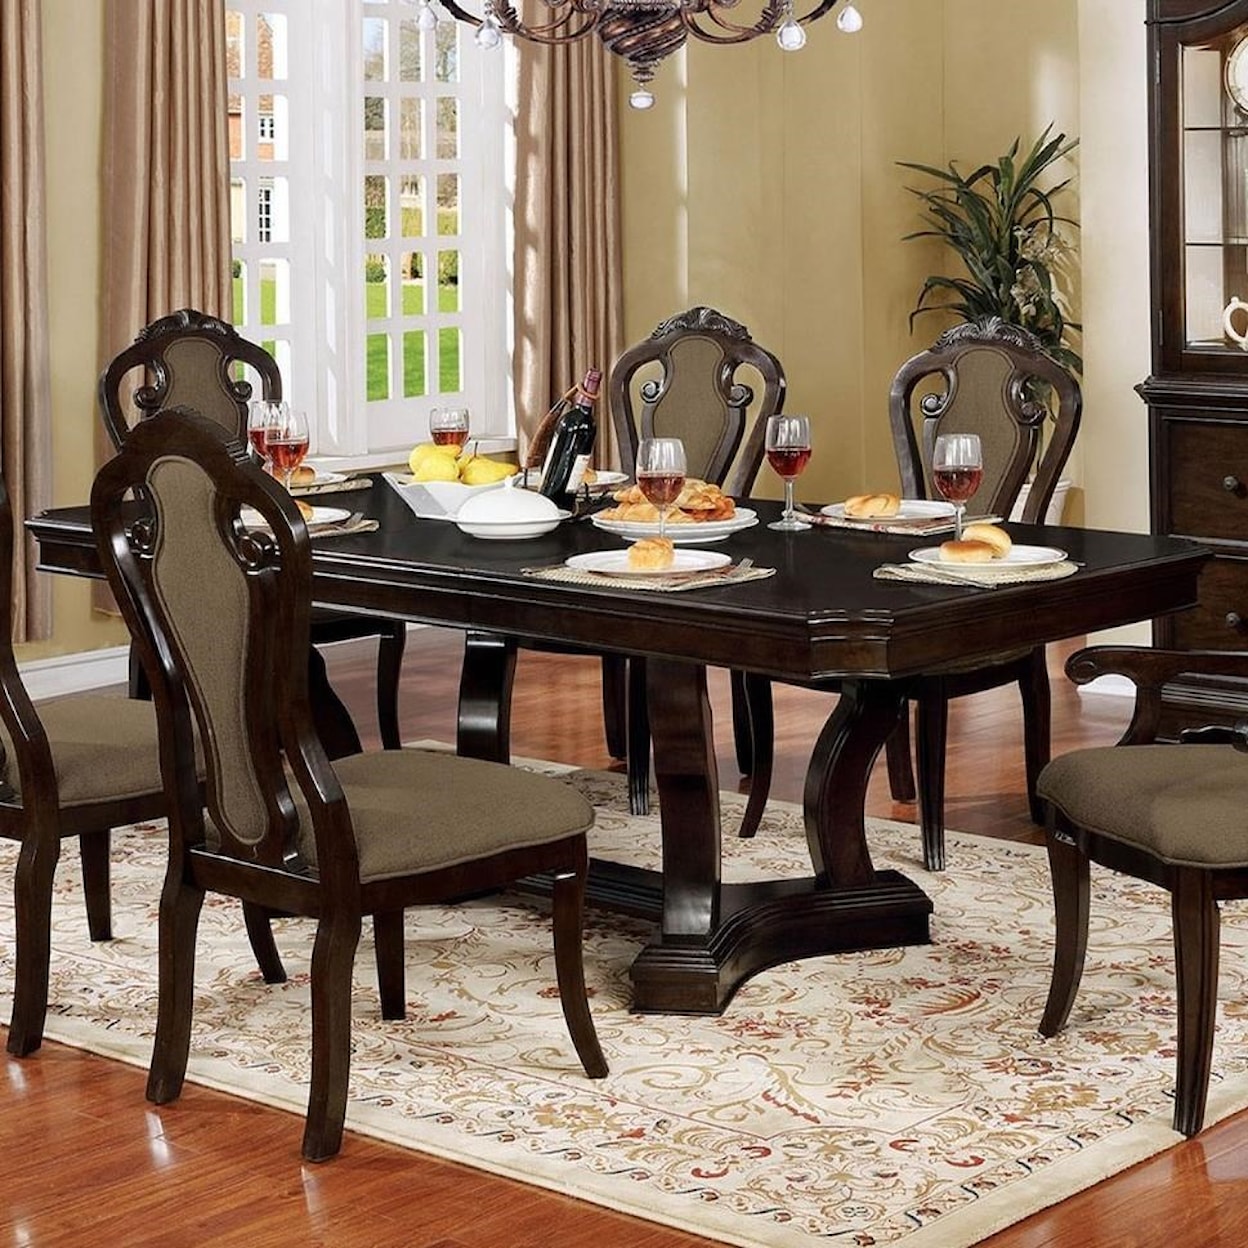 Furniture of America Rosalina Dining Table